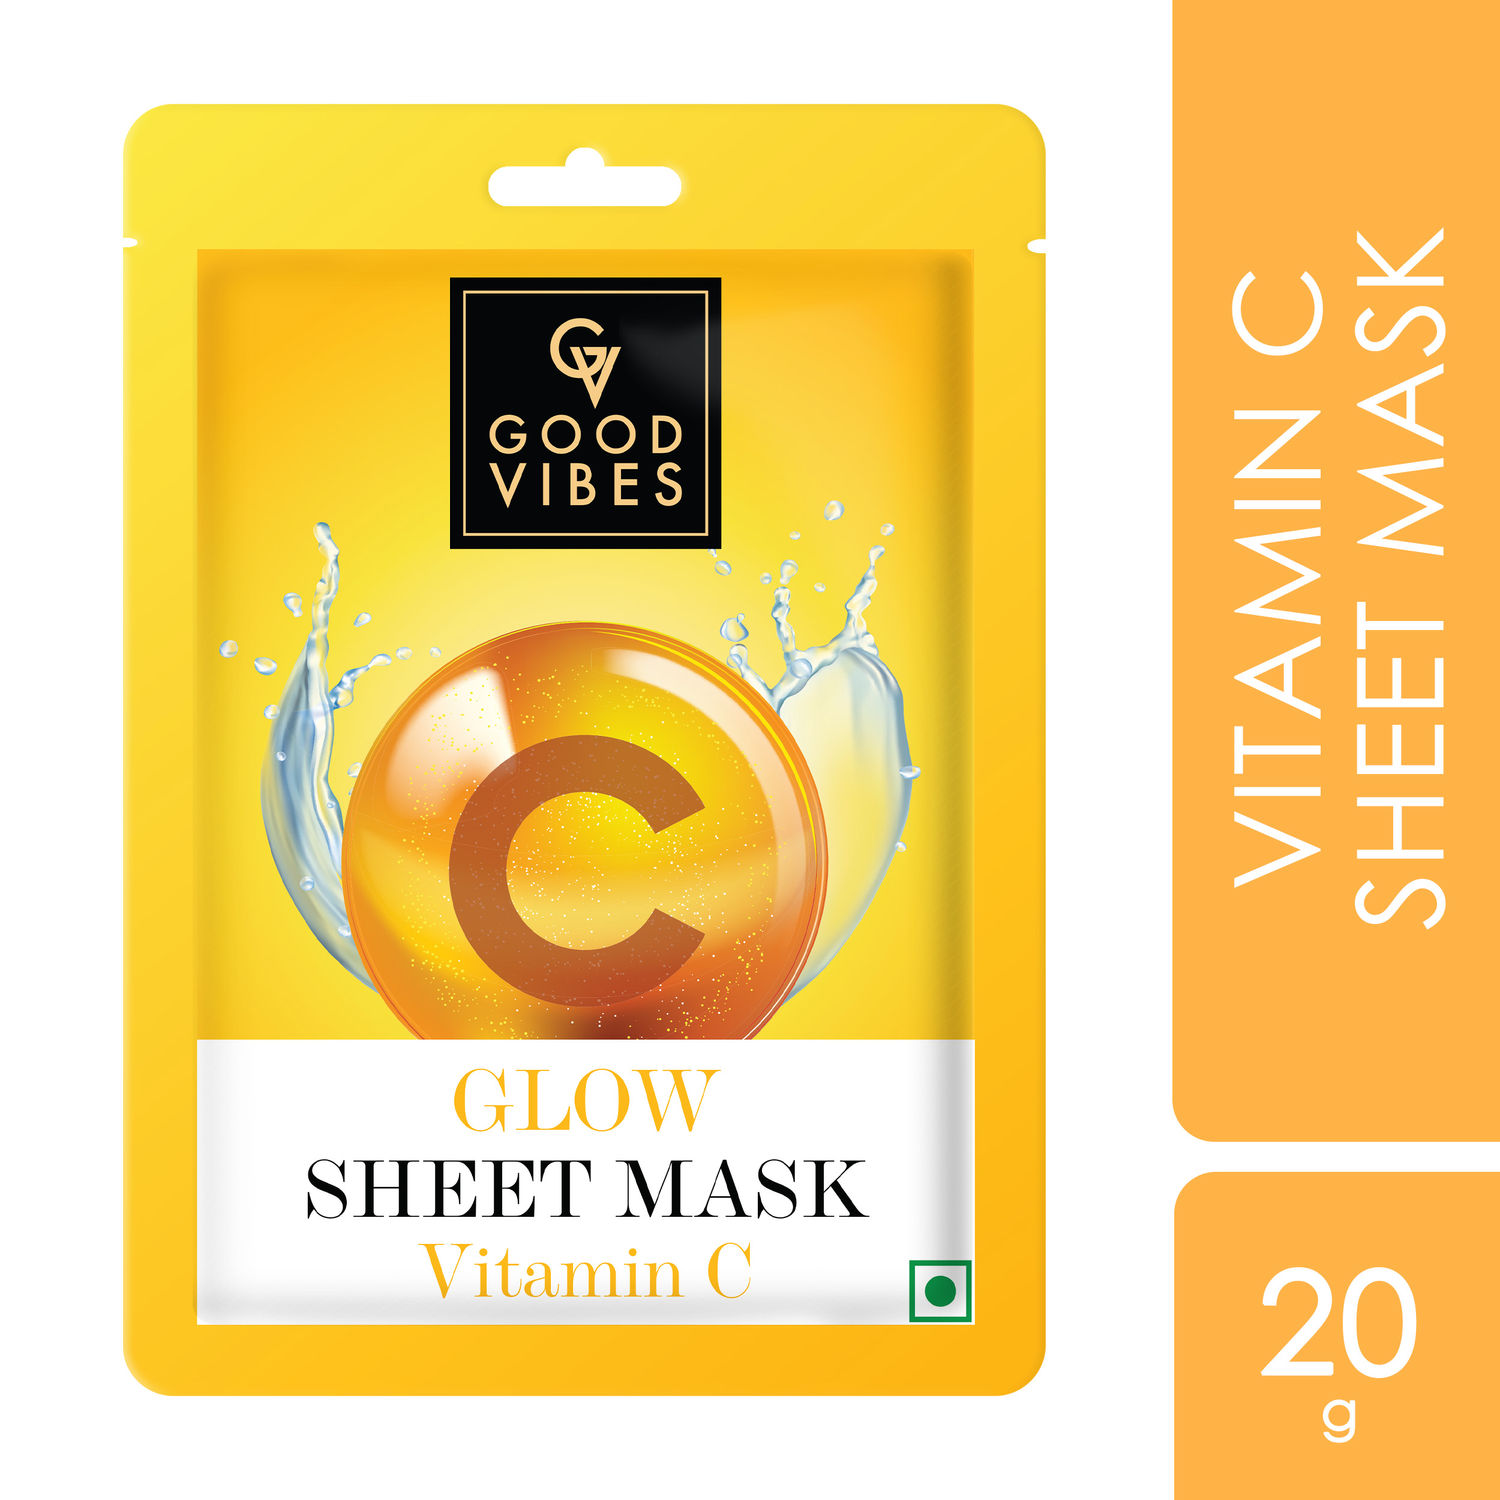 Buy Good Vibes Vitamin C Glow Sheet Mask | For Radiant, Glowing Skin | Vegan, No Parabens, No Sulphates, No Mineral Oil, No Animal Testing (20 g) - Purplle